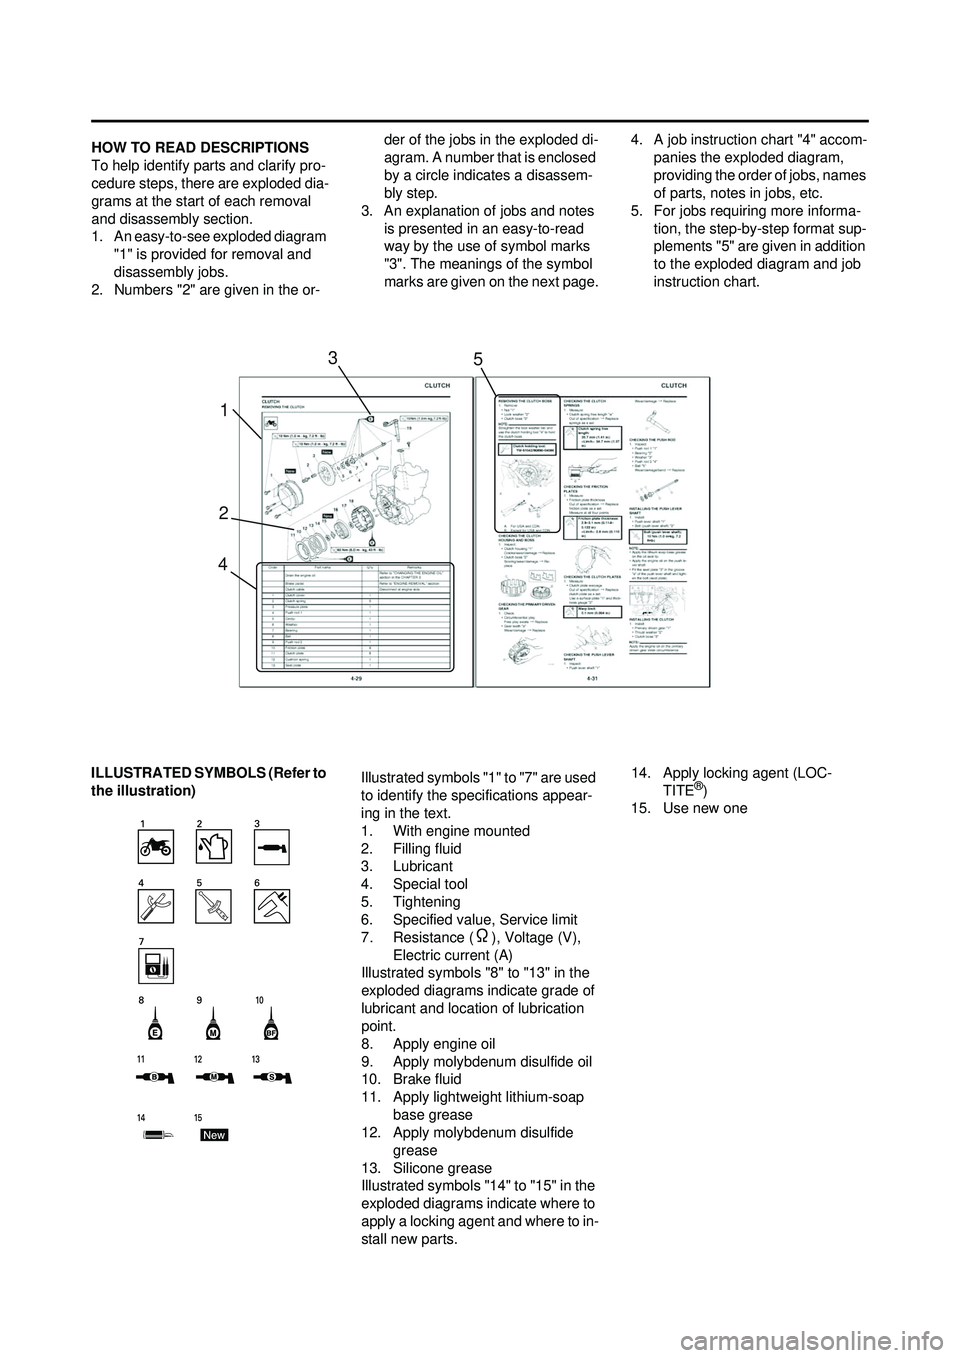 YAMAHA YZ250F 2008  Owners Manual HOW TO READ DESCRIPTIONS
To help identify parts and clarify pro-
cedure steps, there are exploded dia-
grams at the start of each removal 
and disassembly section.
1. An easy-to-see exploded diagram "